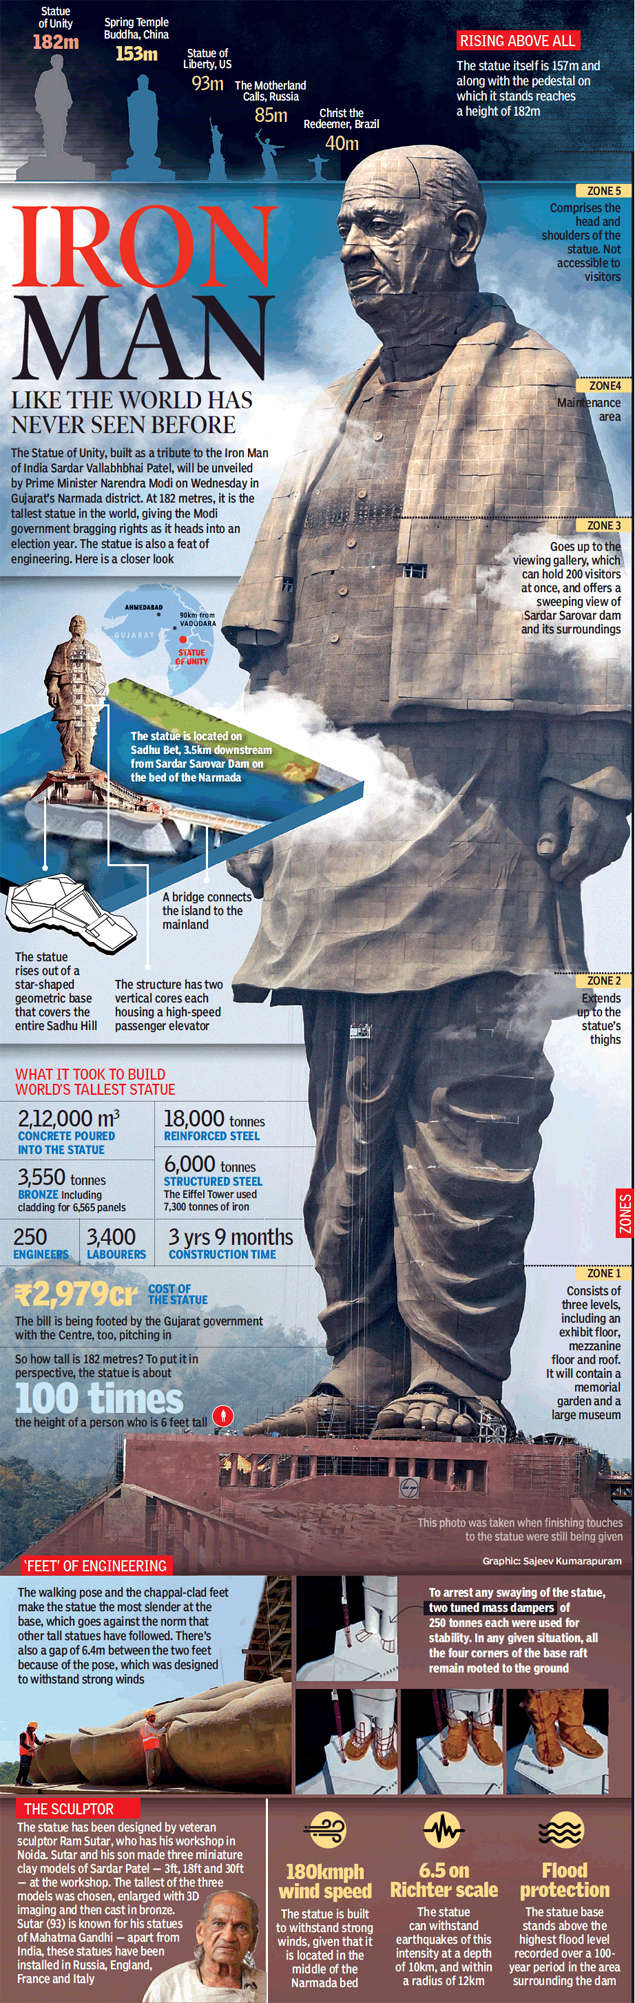 statue of unity height